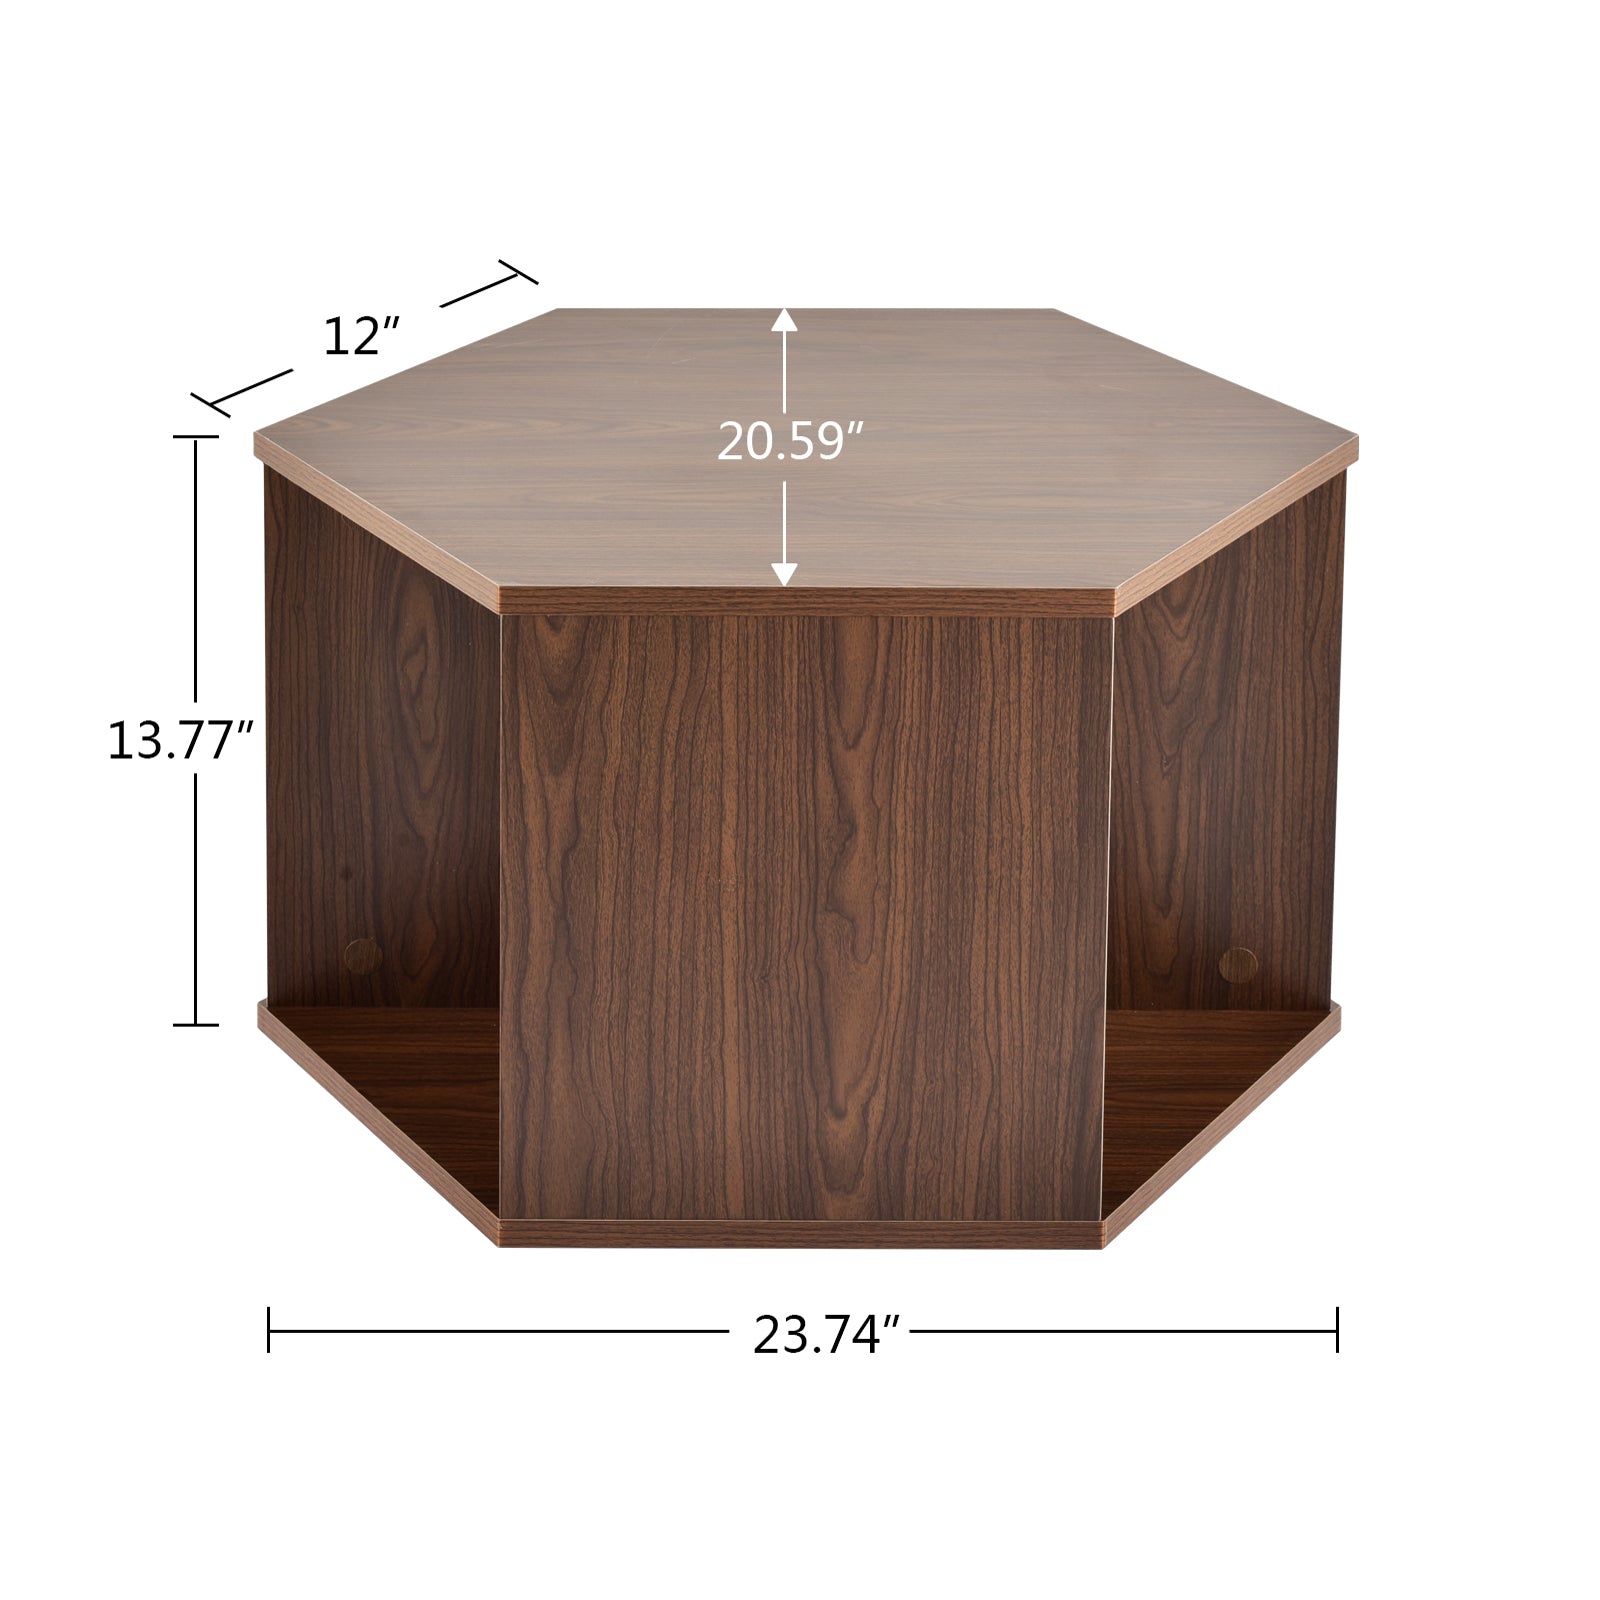 Excellent Solid Wood Hexagonal Storage End Table – Creative Bargains